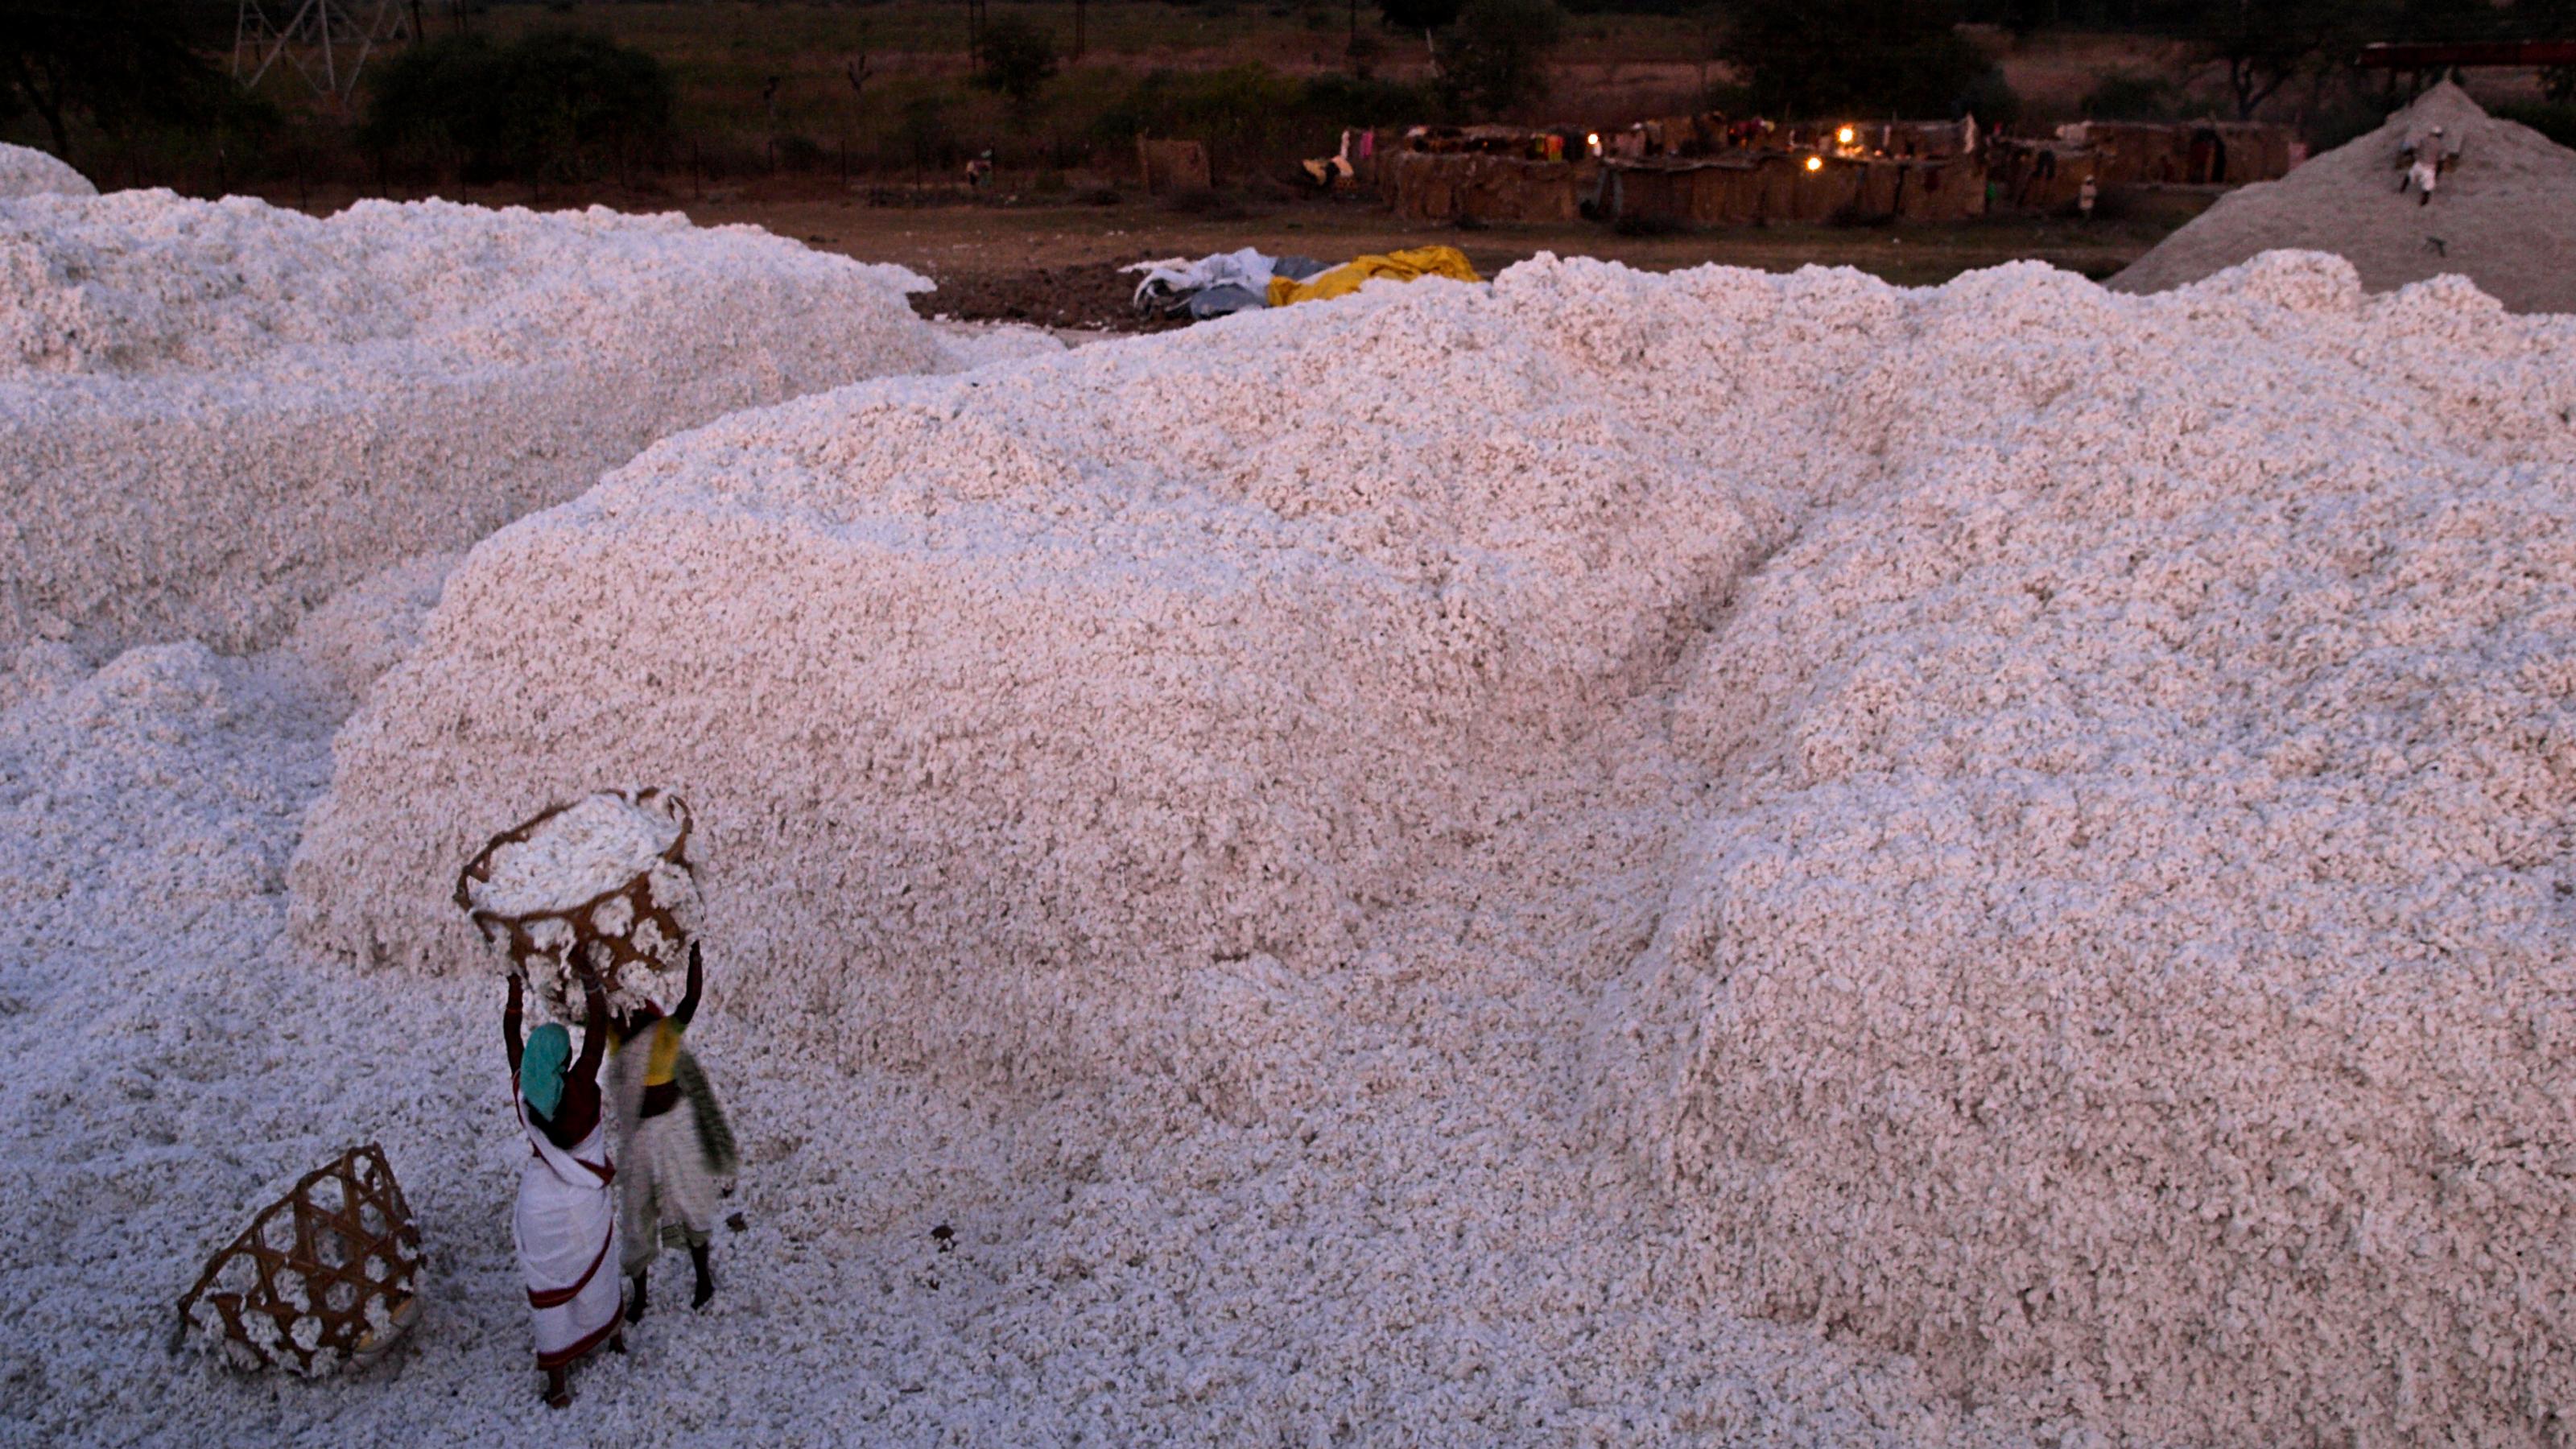 Workers build up big mountains of cotton at a ginning in Pandarkawda, known as the cotton capital of Maharashtra. Many of the workers live just outside the ginning in little huts. Although the ginning itself becomes increasingly mechanized the preparing work is still very labor intensive, because the raw cotton arrives unsorted and is just dumped outside of the factory.